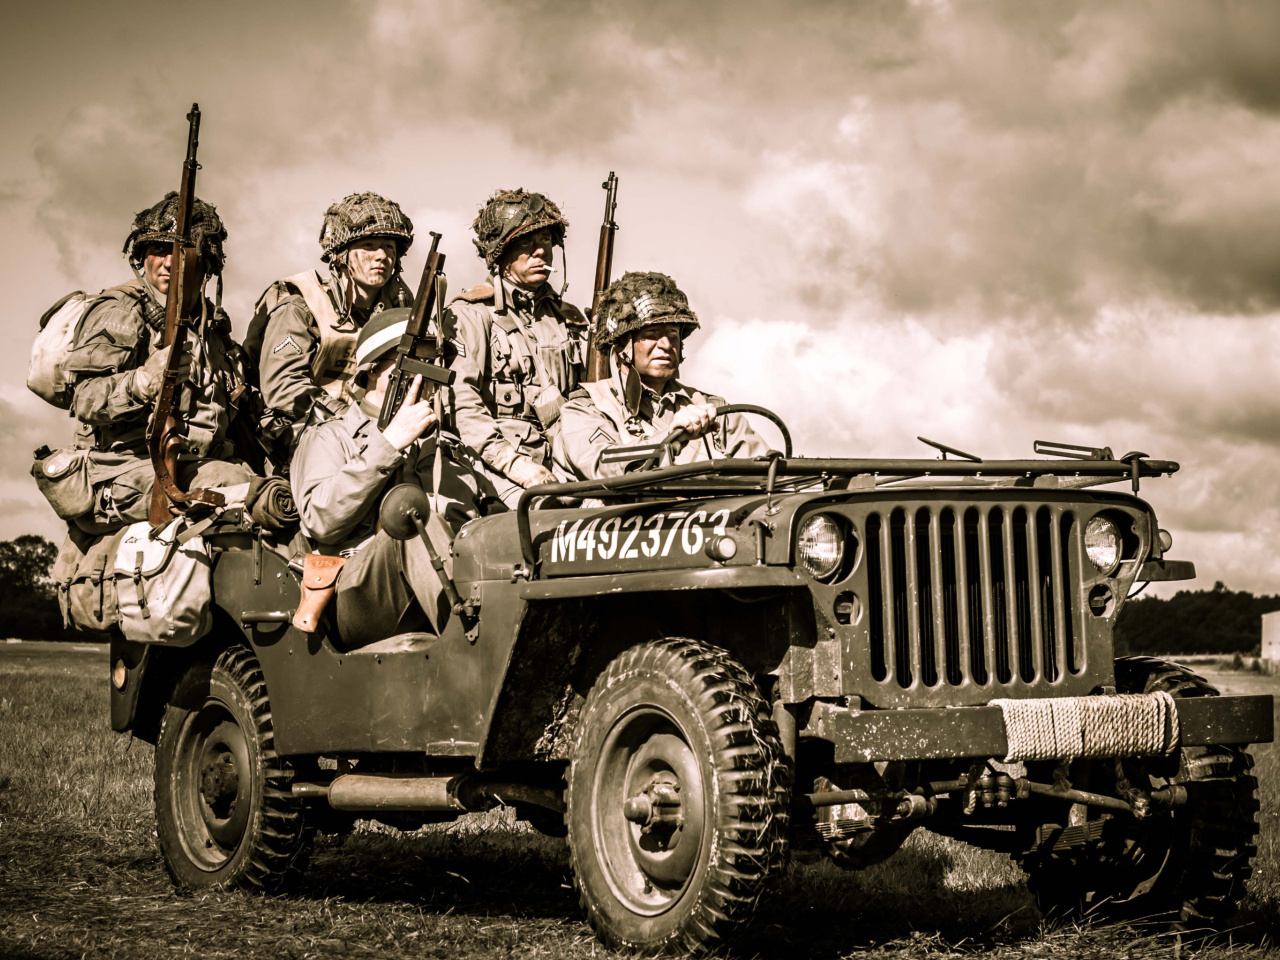 Das Soldiers on Jeep Wallpaper 1280x960